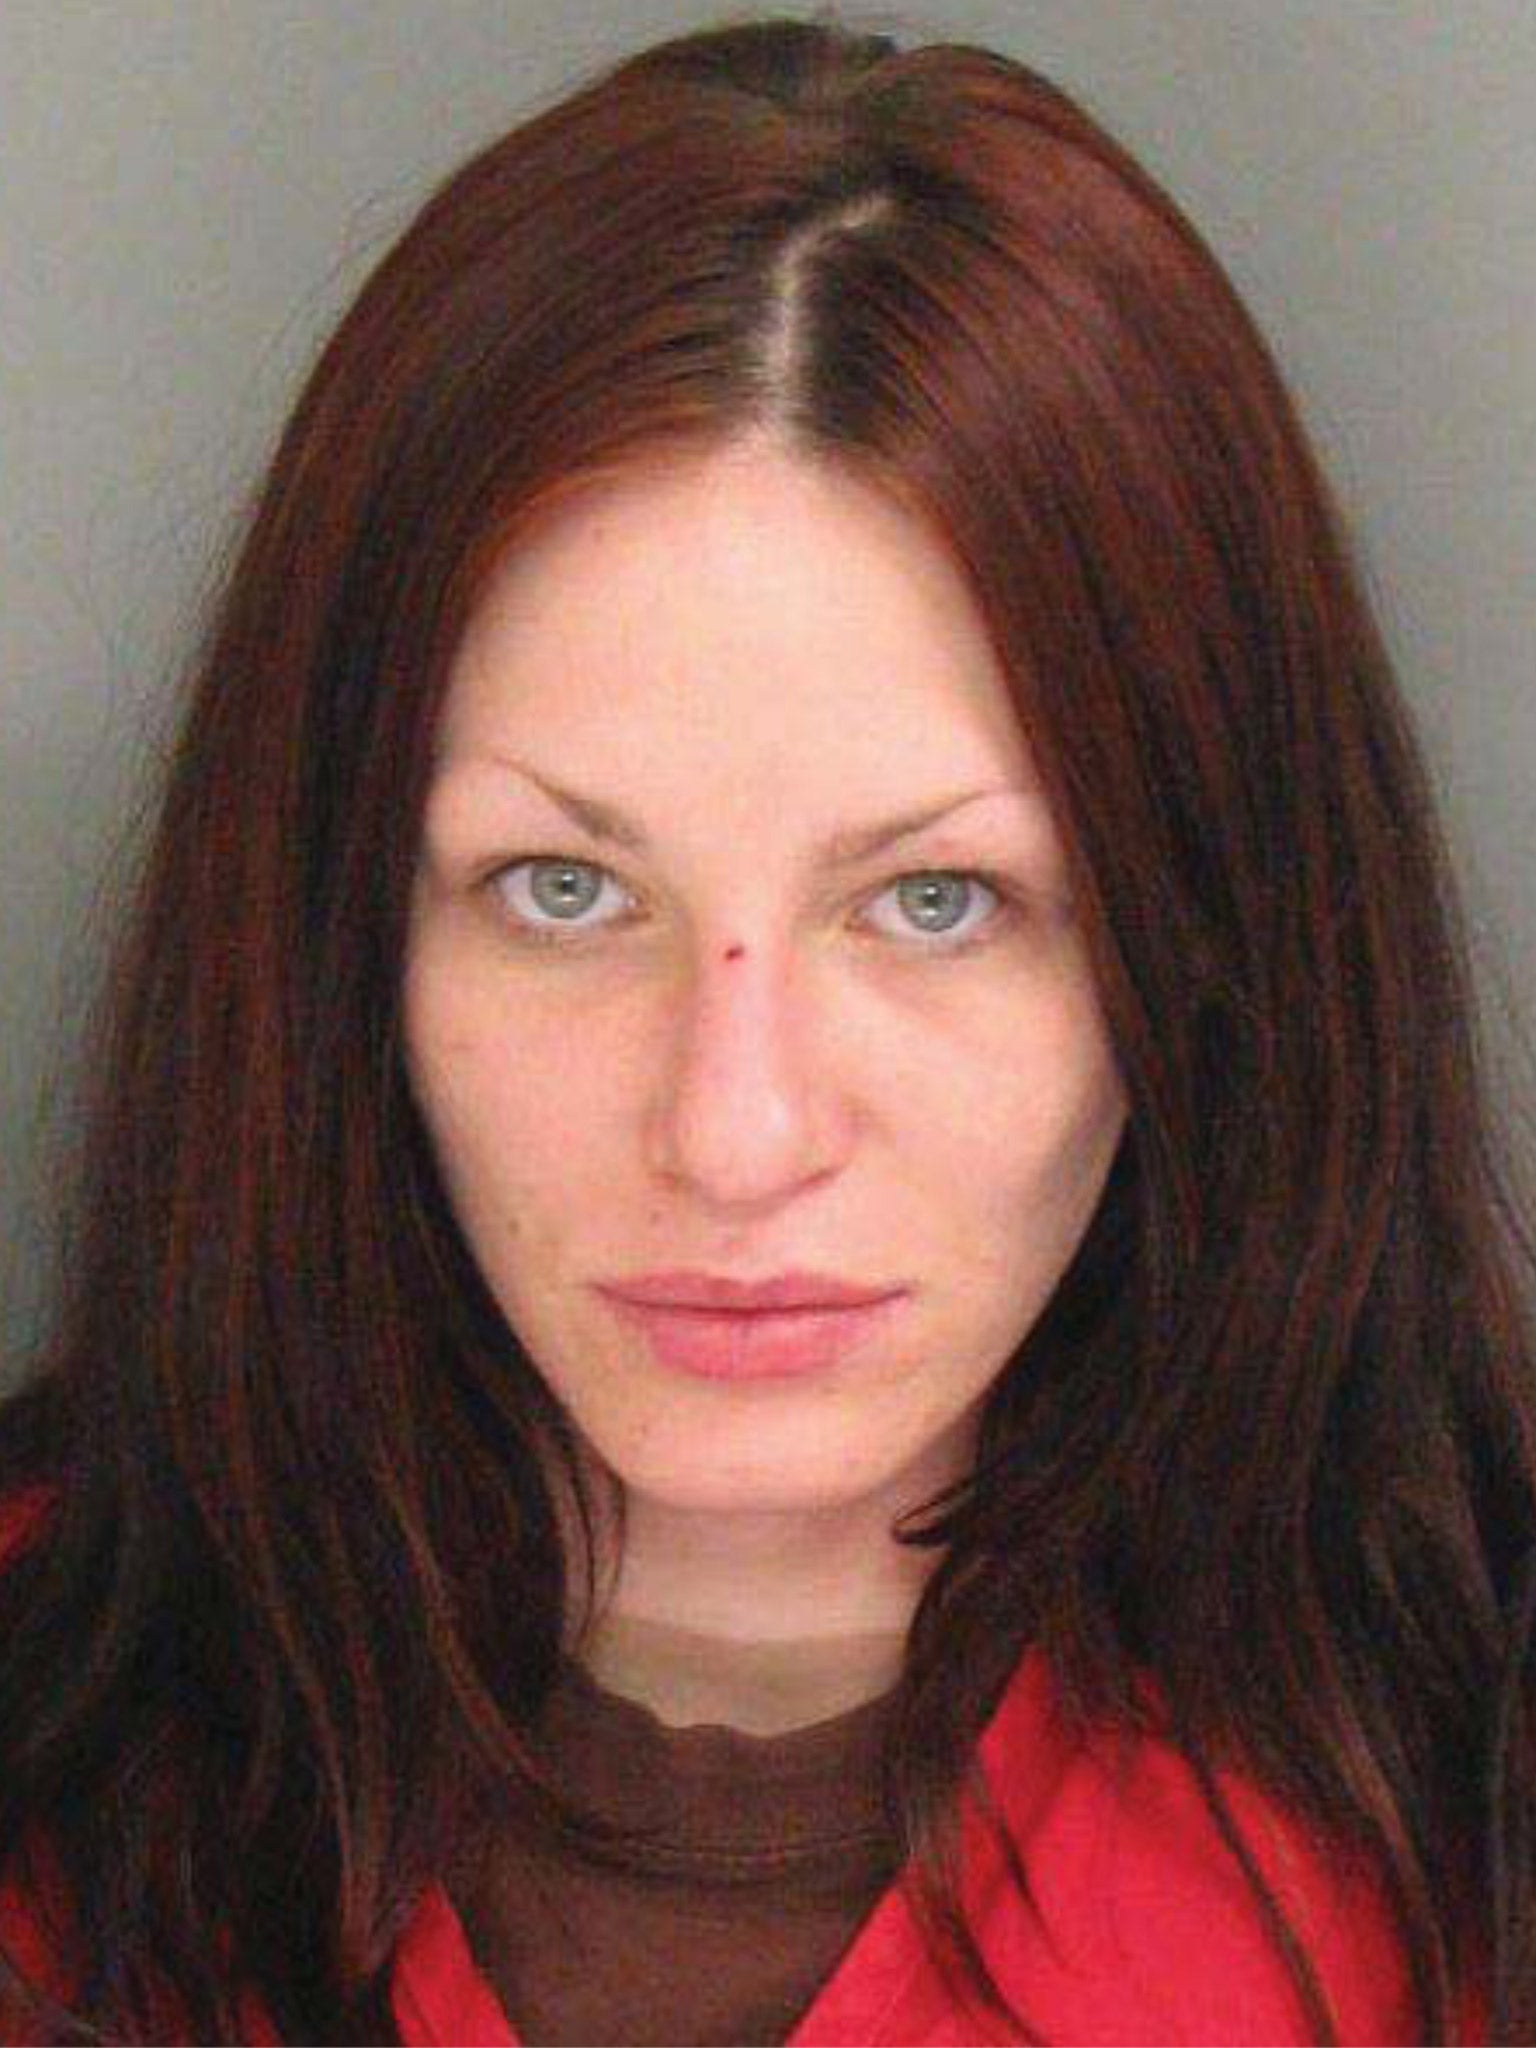 Alix Tichleman after she was booked into county jail in Santa Cruz, California